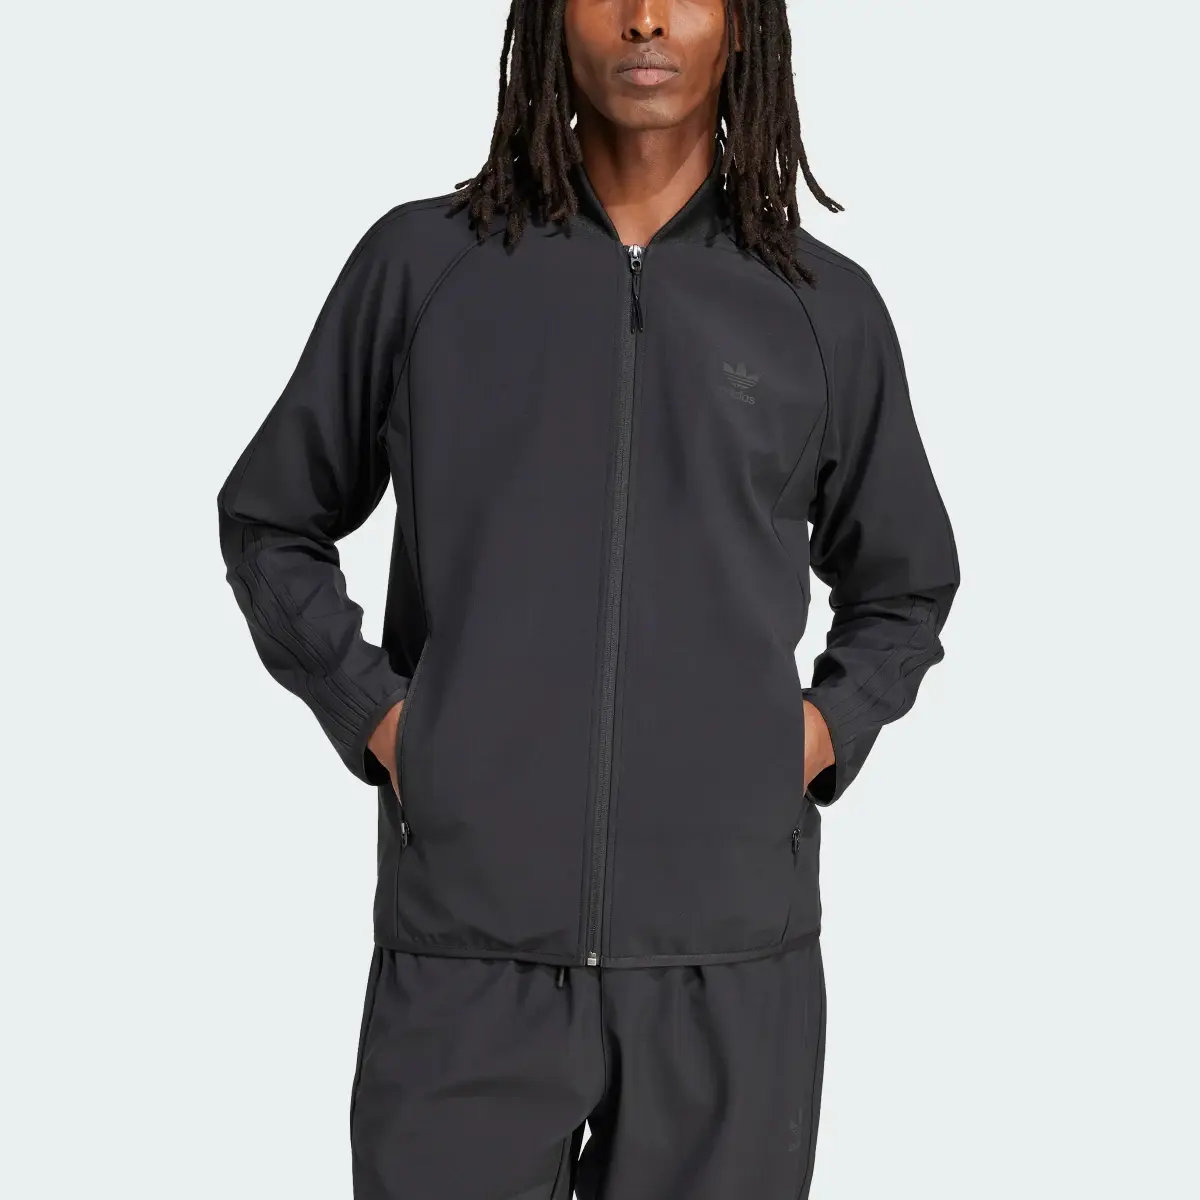 Adidas SST Bonded Track Top. 1